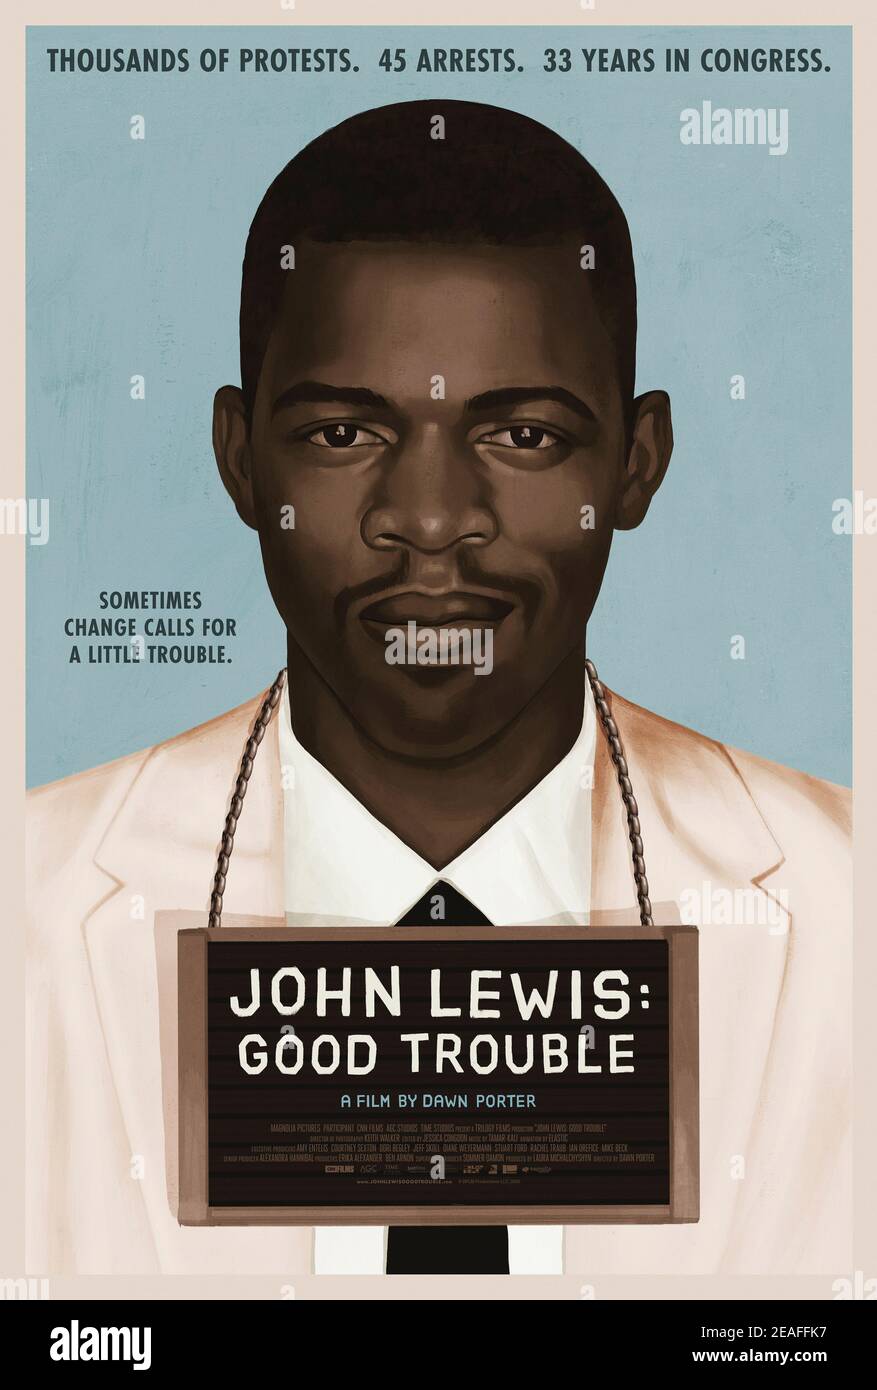 John Lewis: Good Trouble (2020) directed by Dawn Porter and starring Elijah Cummings, Anthony Johnson and Hillary Clinton. Documentary about politician John Lewis who represented Georgia for over 60 years campaigning for civil rights, voting rights, gun control, health care reform and immigration. Stock Photo